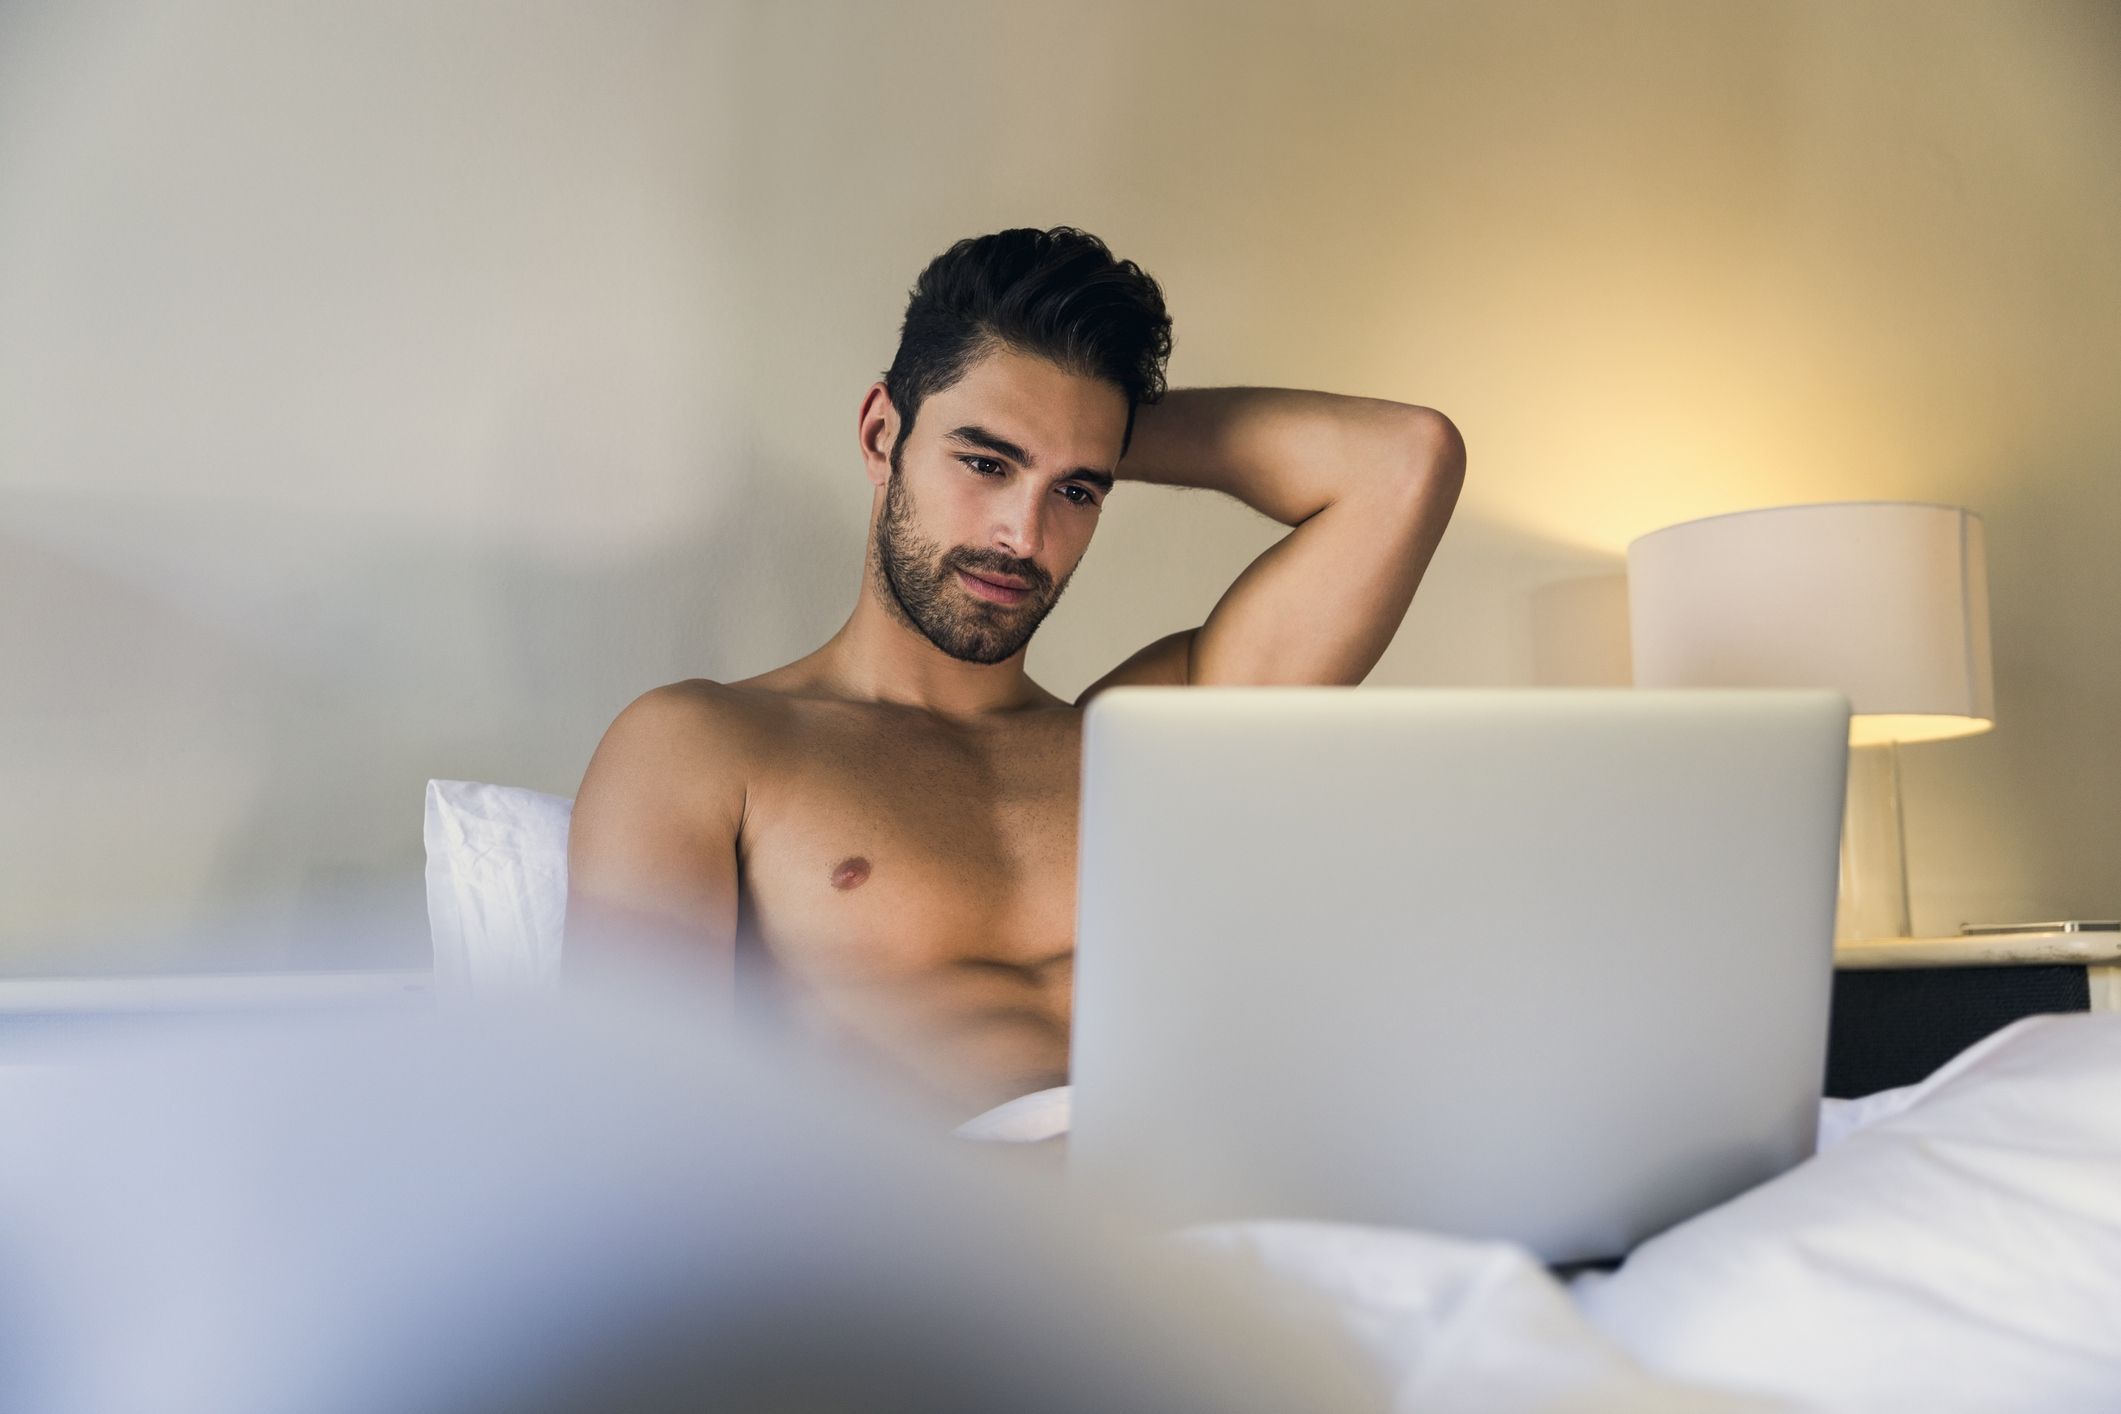 Browser Sexy Com - How to Browse Porn Sites Safely Without Getting Hacked